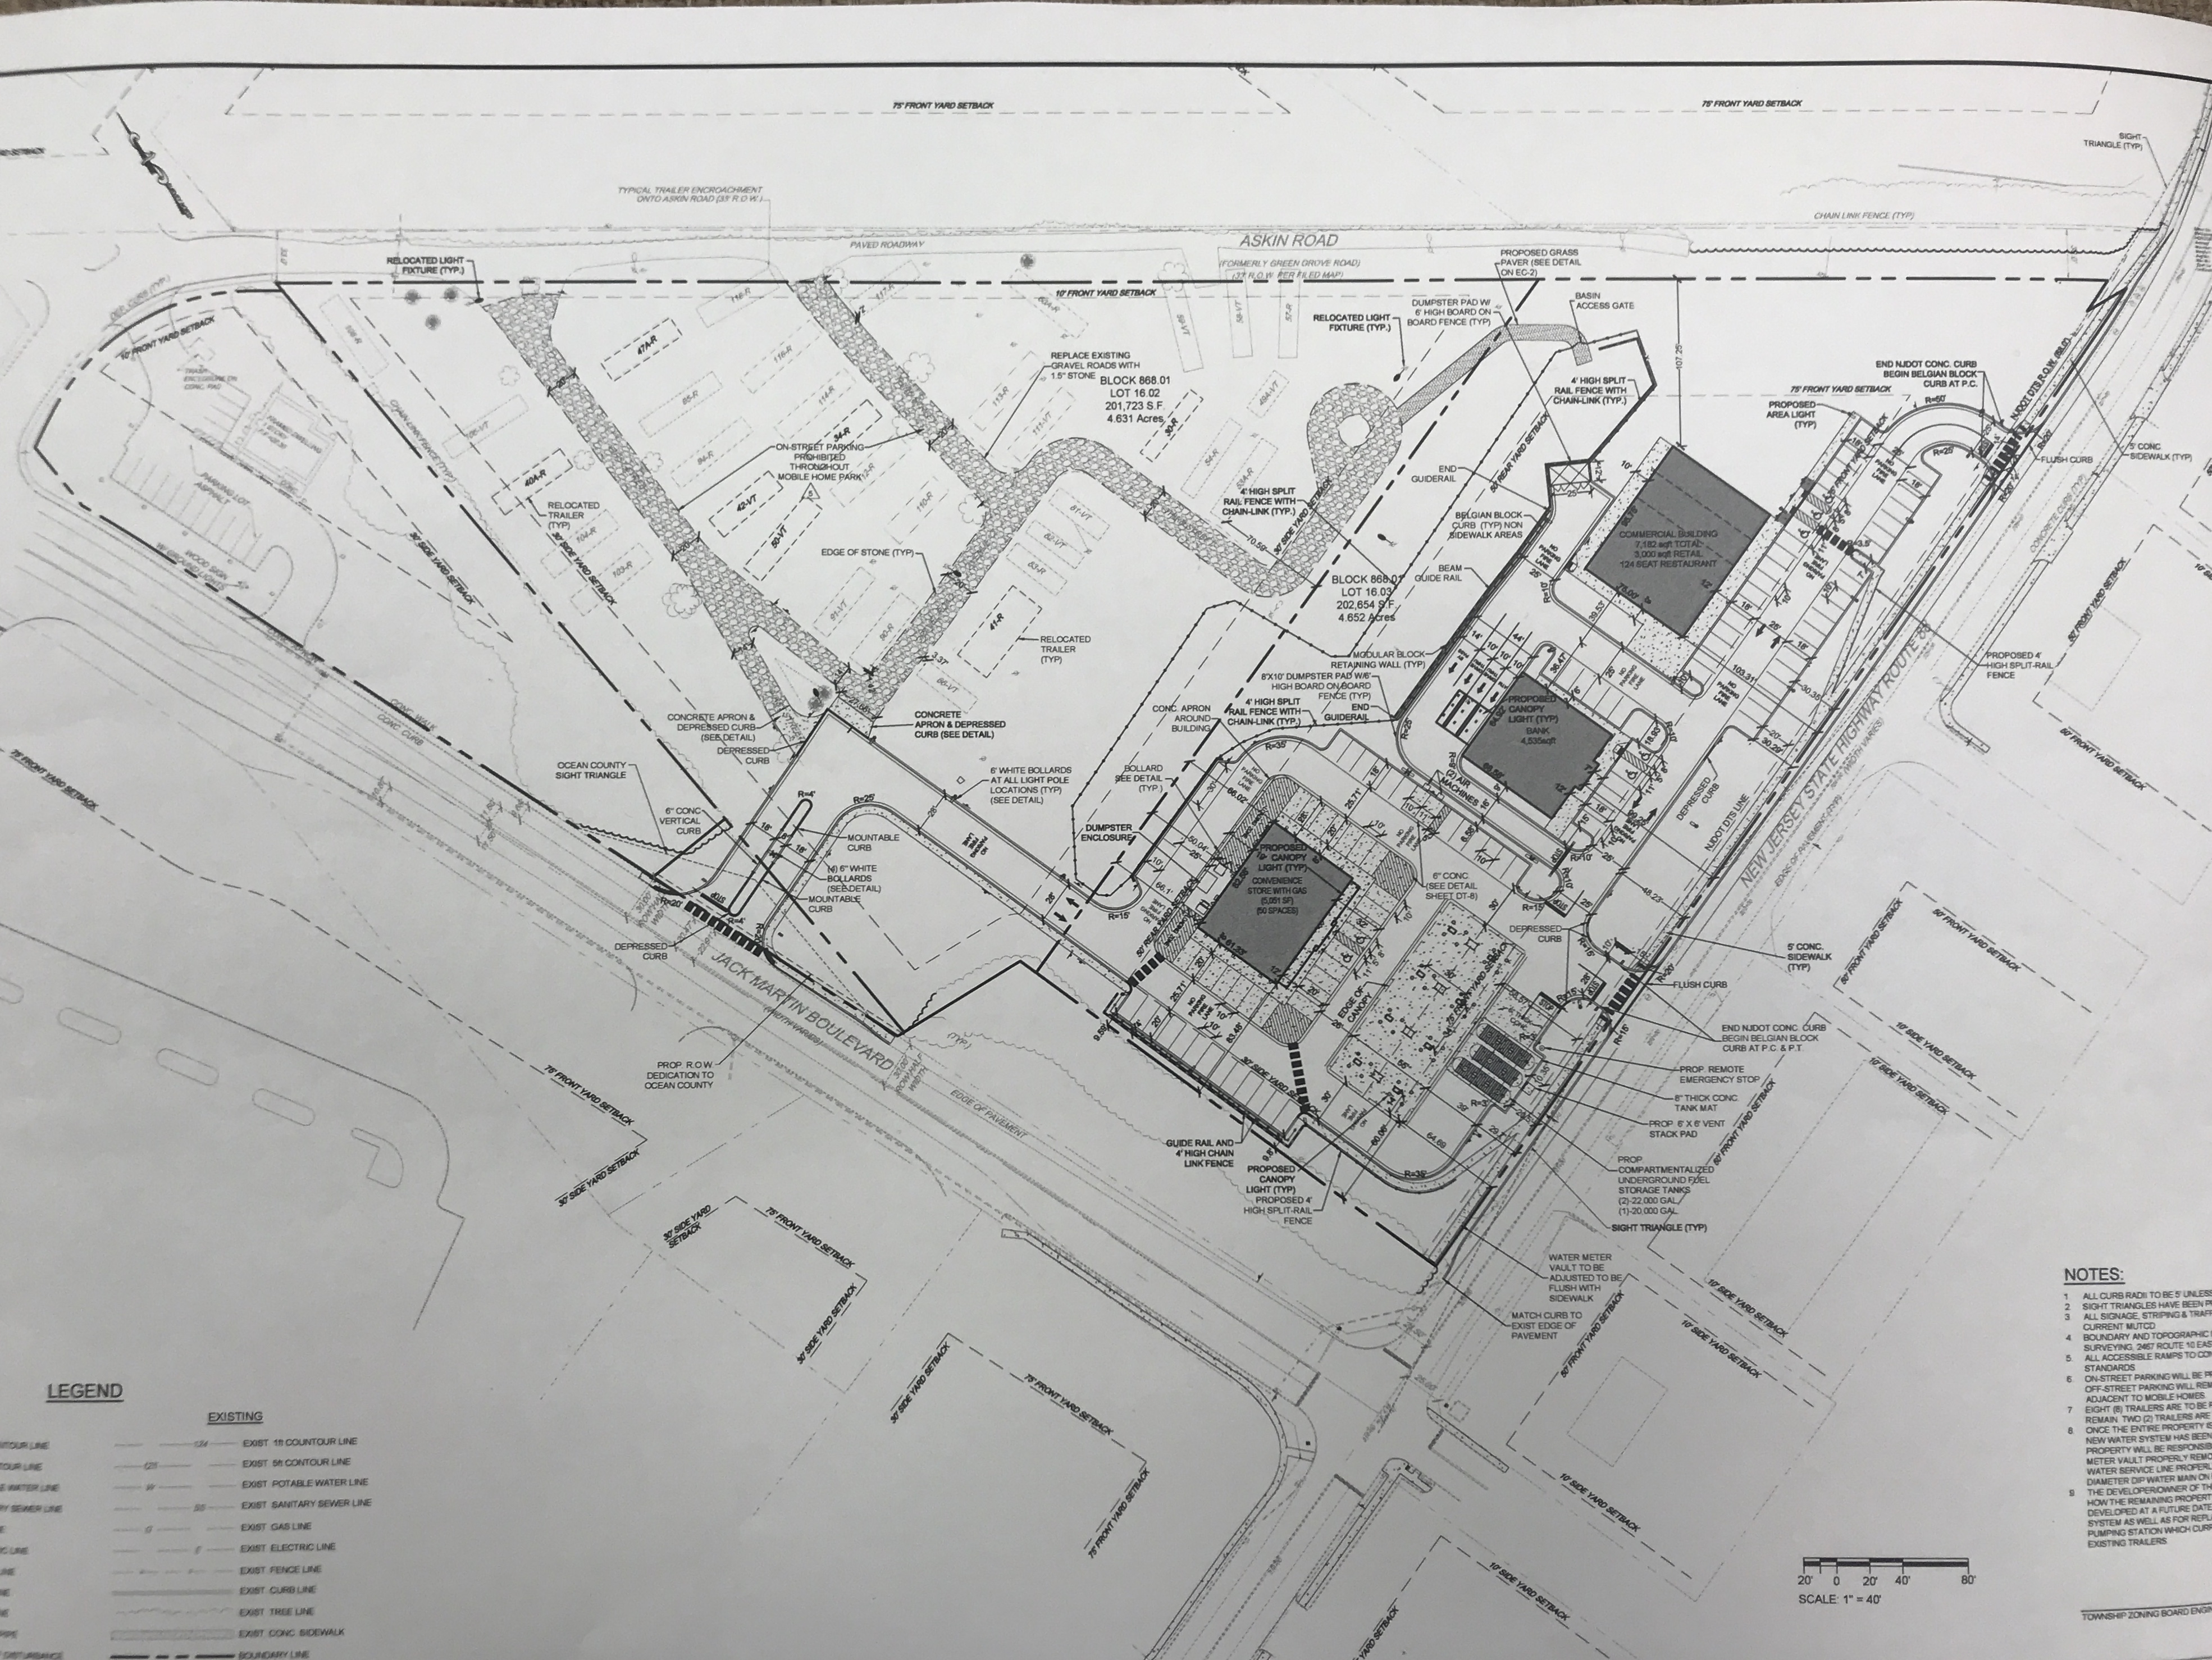 Plans for a new Wawa and adjacent stores in Brick. (Photo: Daniel Nee)